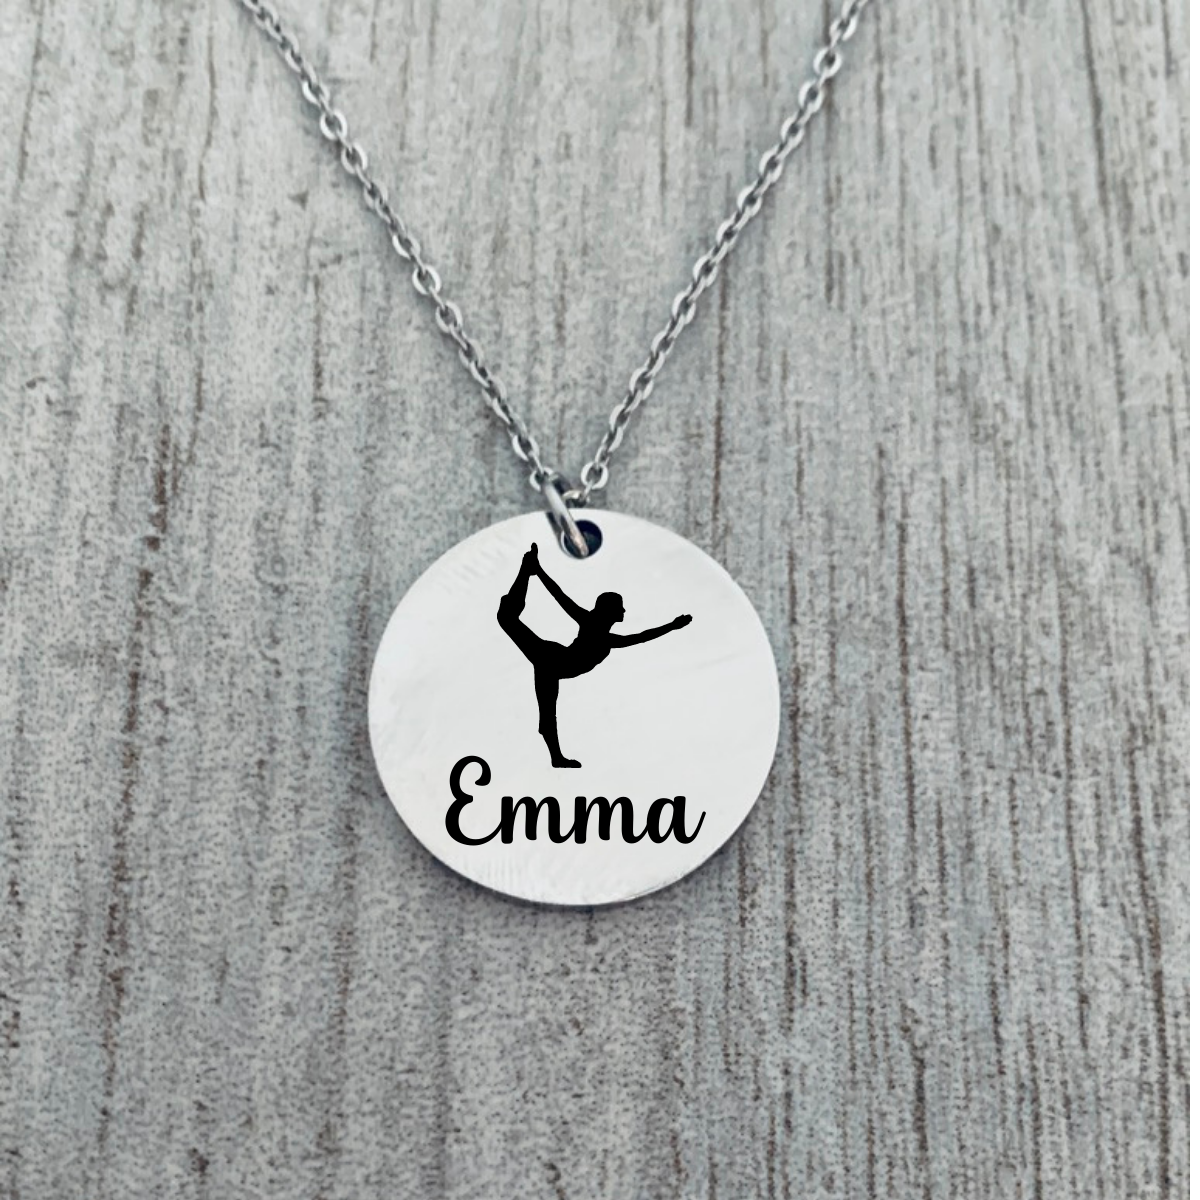 Personalized Engraved Gymnastics Necklace- Pick Style